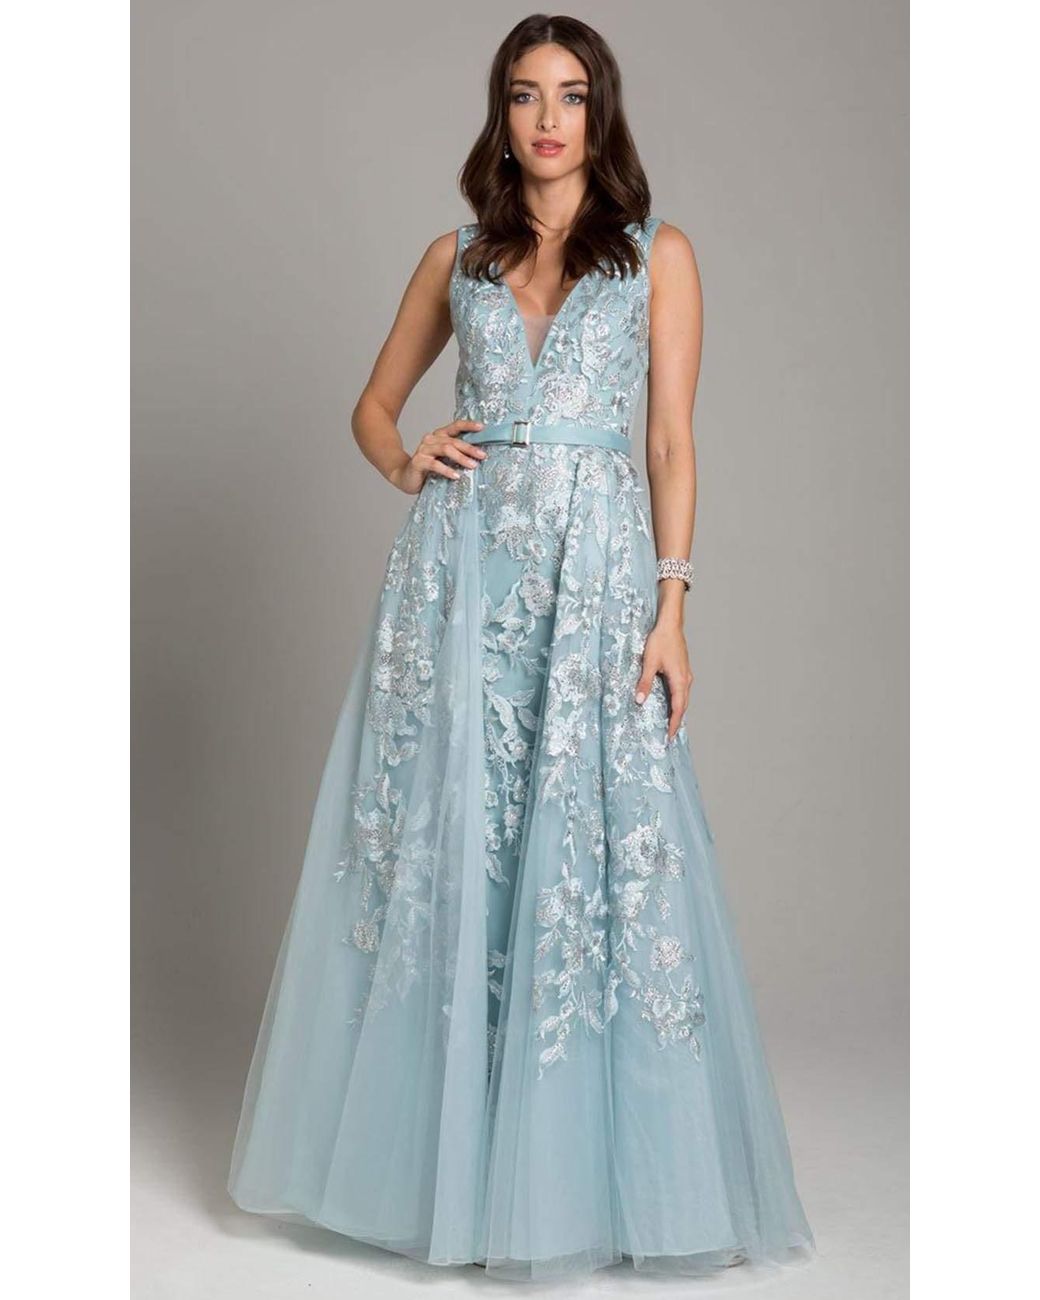 Lara Dresses 29862 V-neck Beaded Lace Ornate Tulle A-line Gown in Blue ...